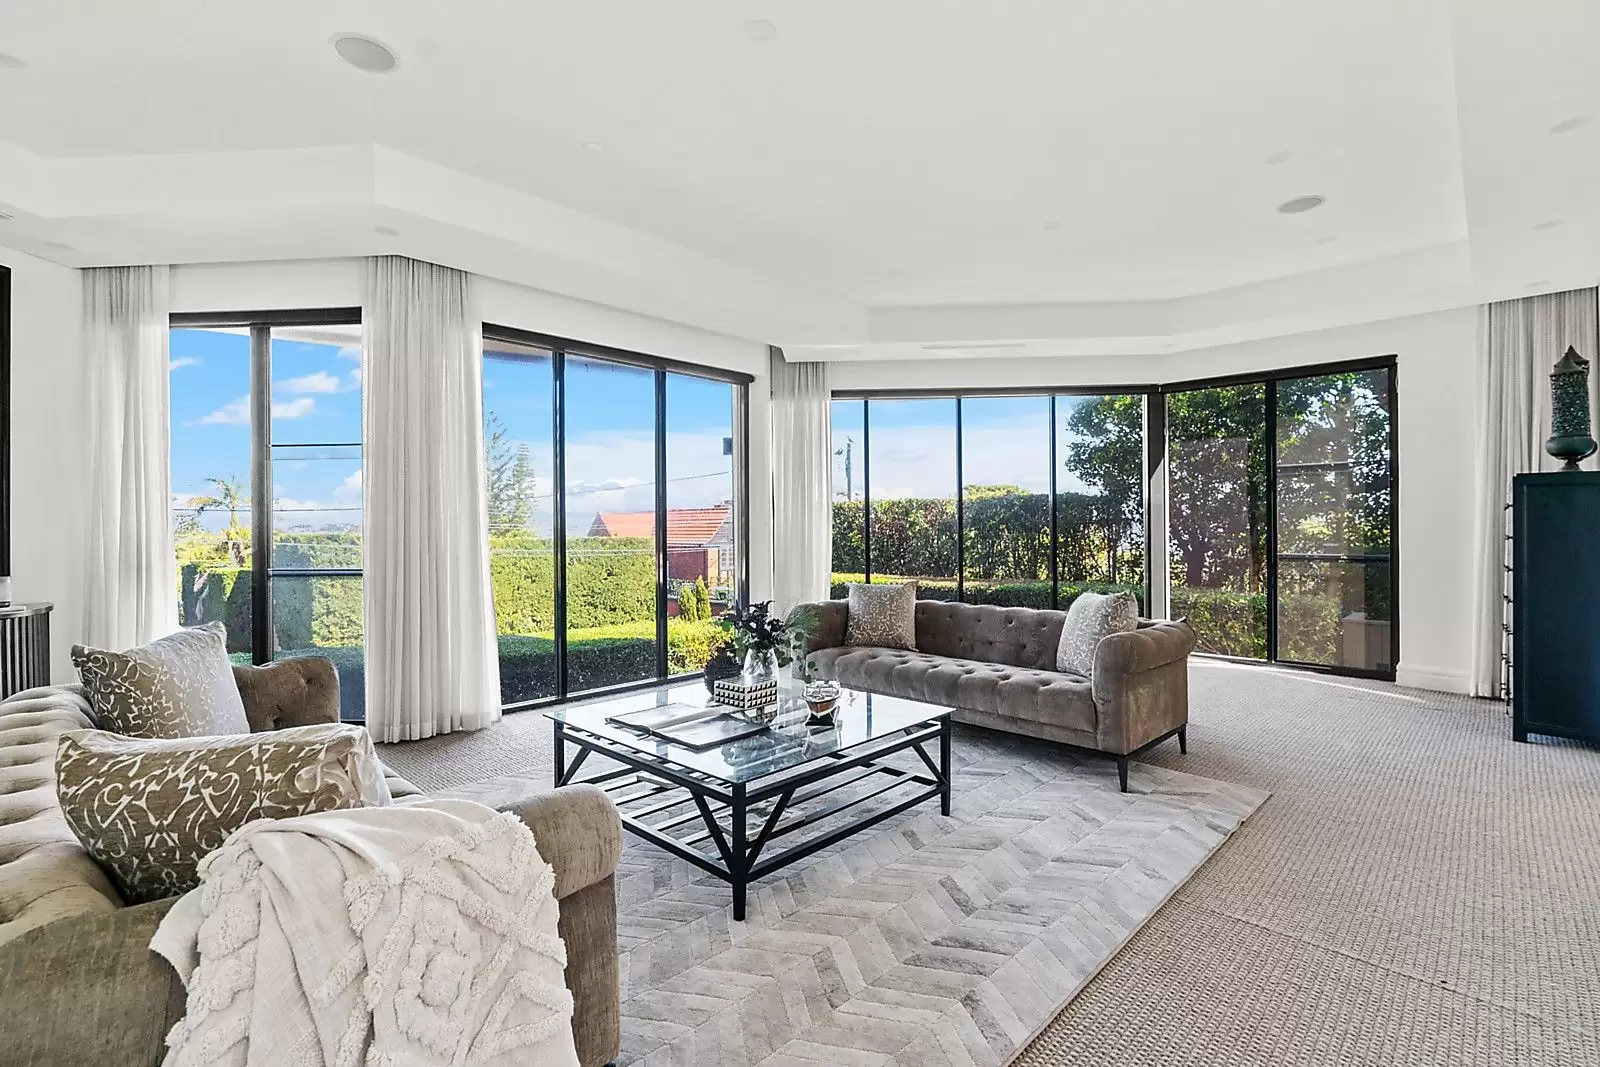 Photo #3: 7 Dalley Avenue, Vaucluse - Sold by Sydney Sotheby's International Realty